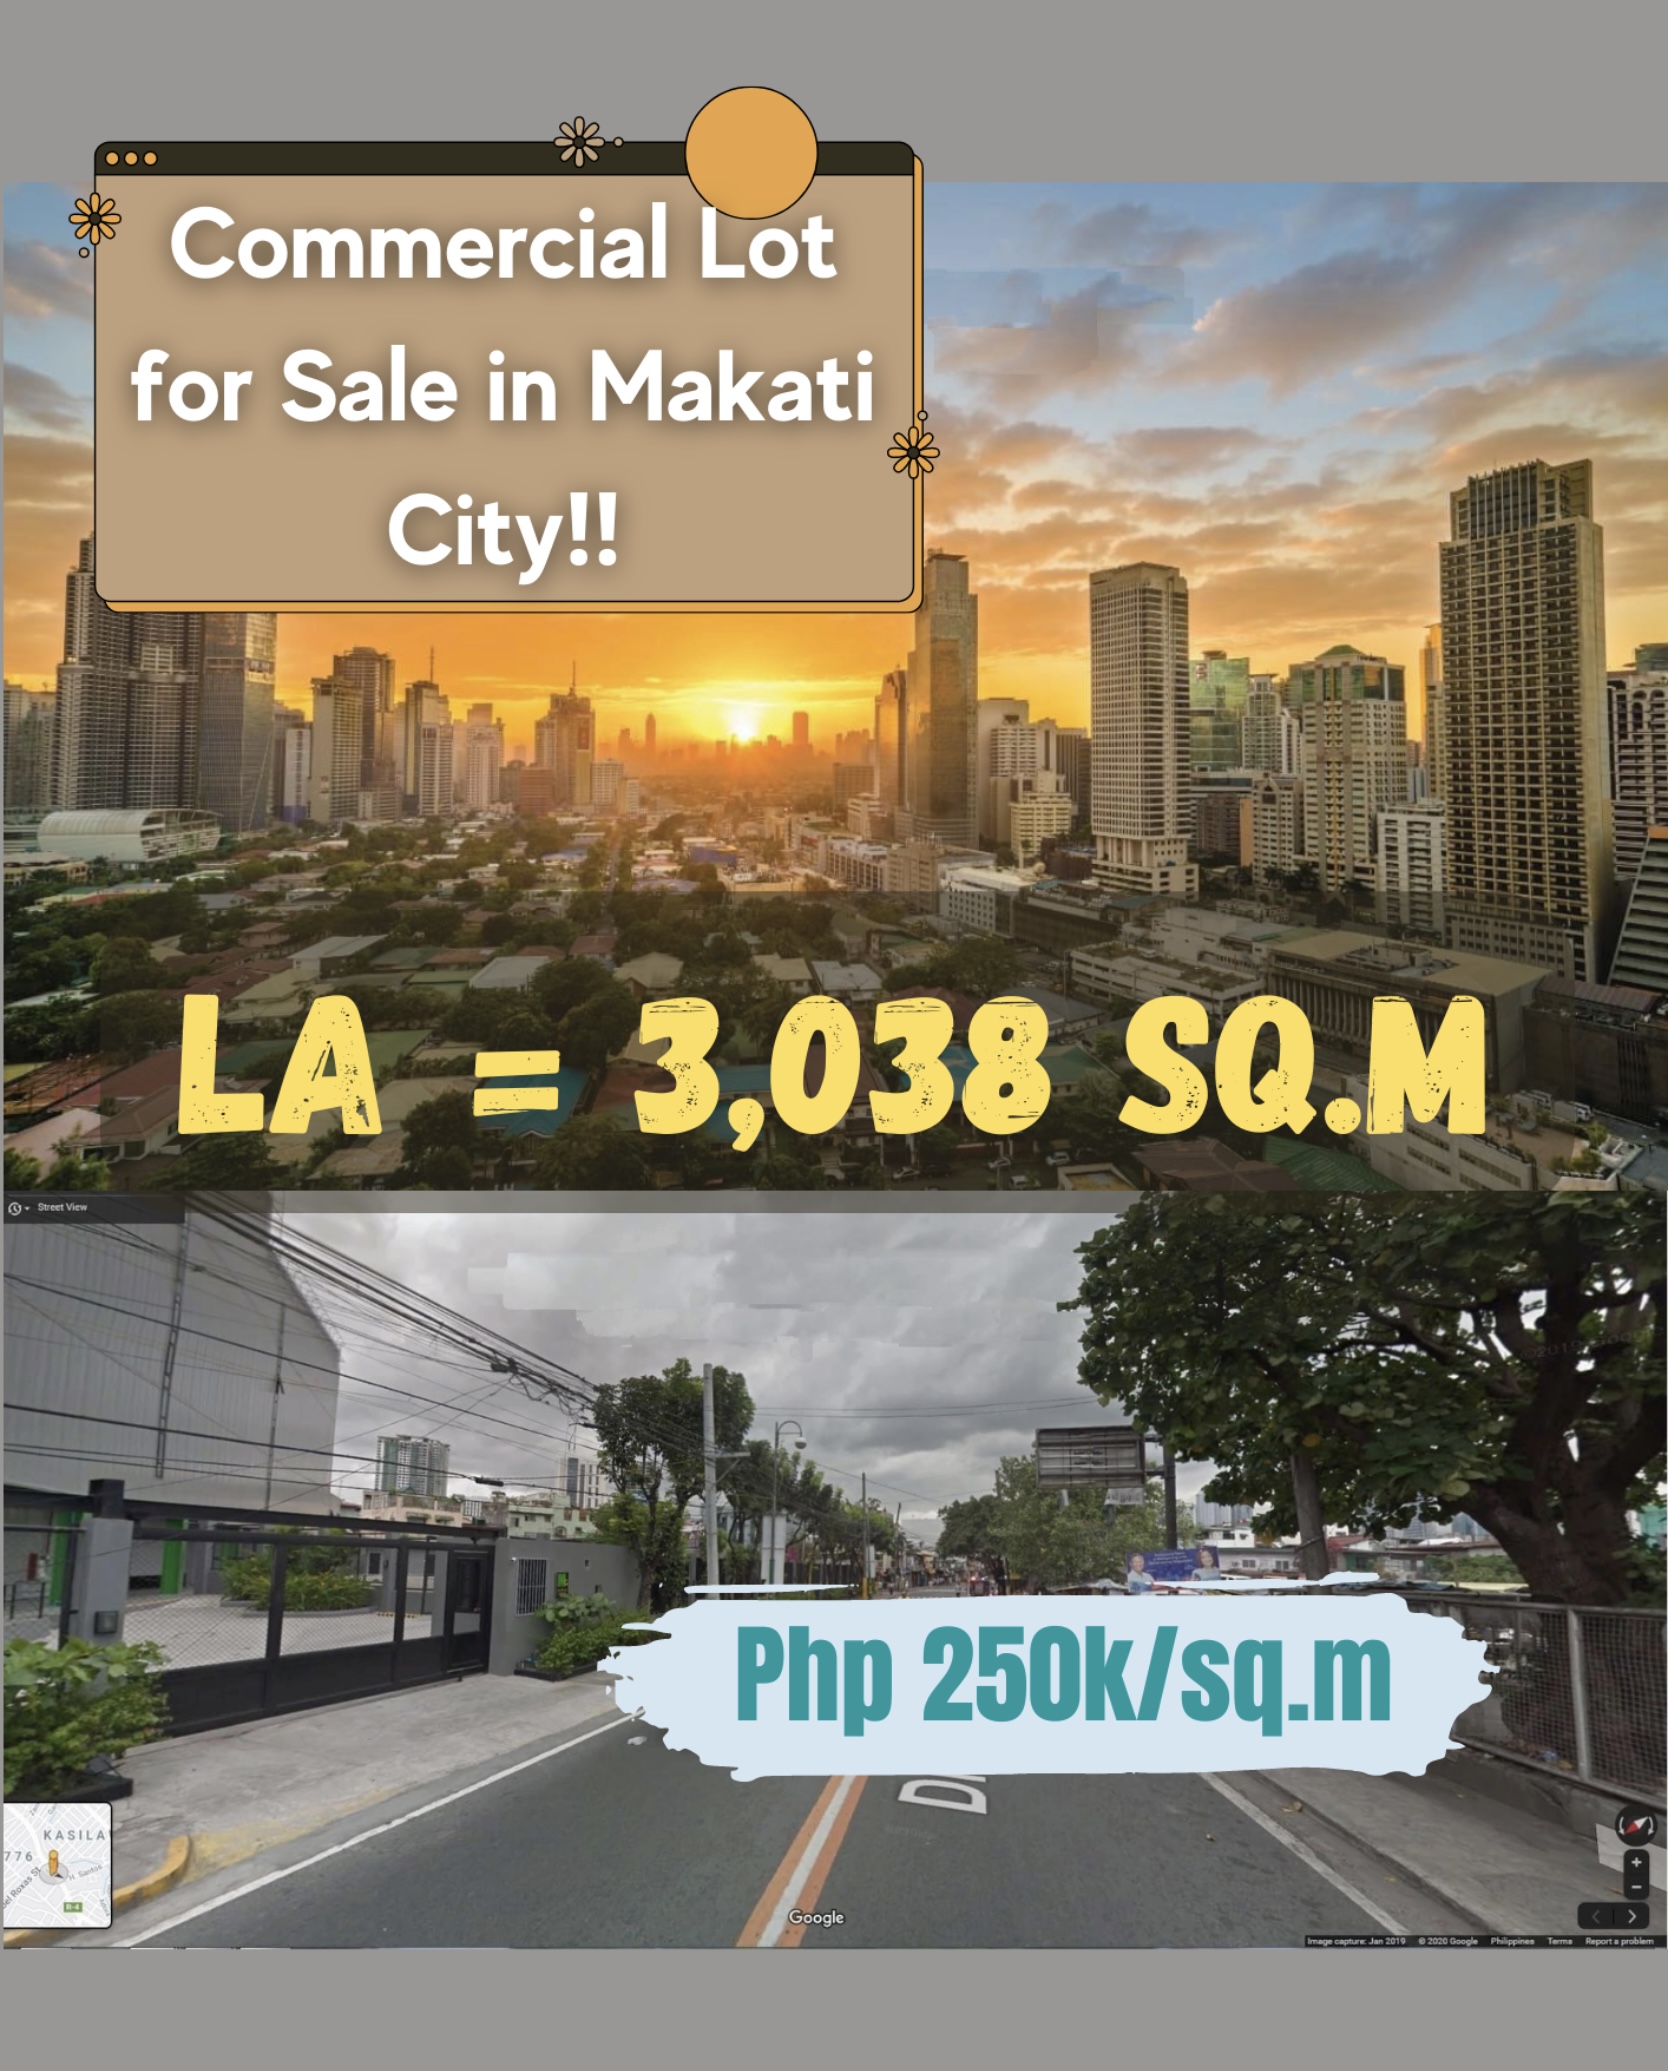 Commercial lot for Sale in Makati City‼️